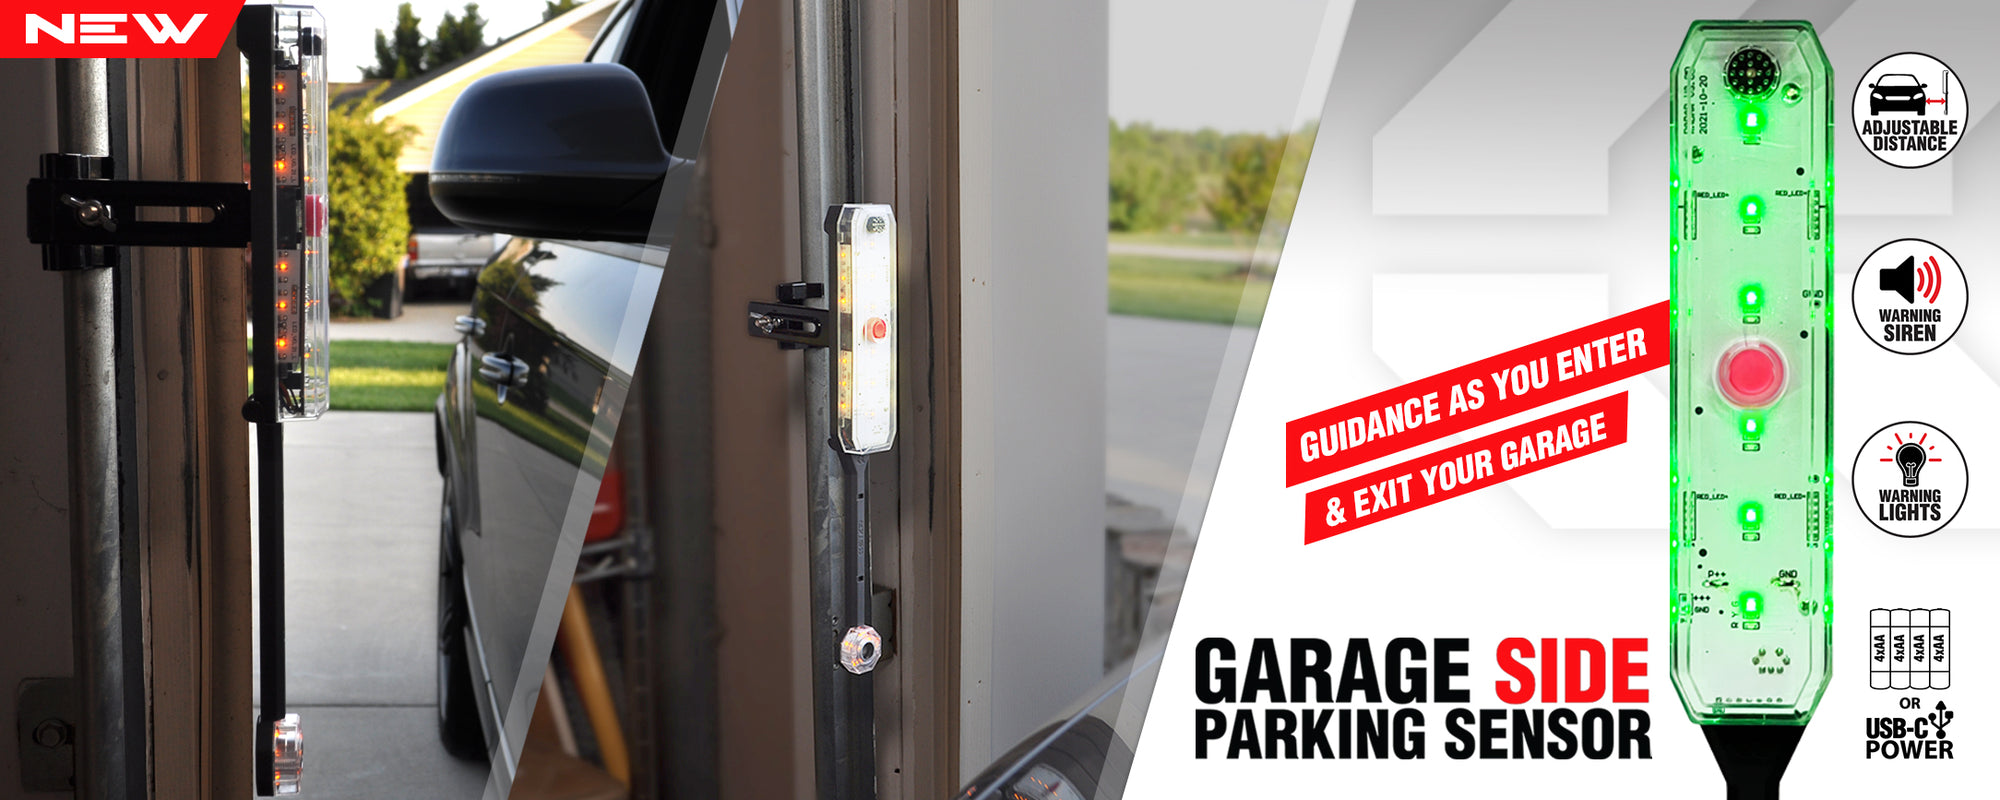 Garage side parking sensor homepage banner featuring 2 garage use pics and one studio image with titles and feature logos. Text reads: Garage Side Parking Sensor, Guidance as you enter & exit your garage, Adjustable Distance, Warning Siren, Warning Lights